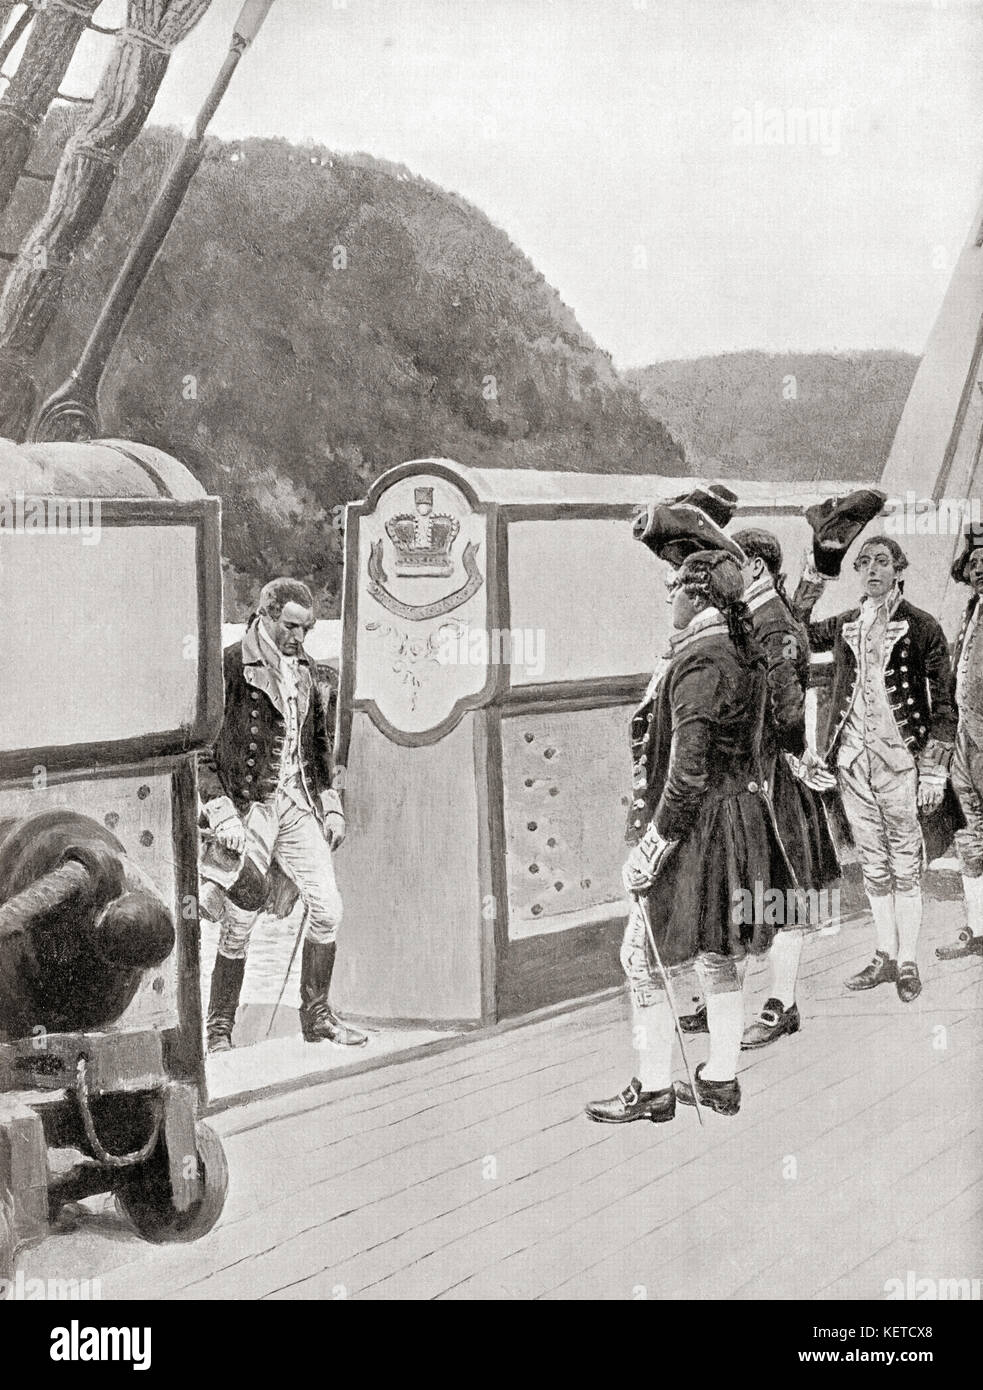 The escape of Bendict Arnold in 1780, seen here boarding the British sloop-of-war Vulture.  Benedict Arnold, 1741 - 1801.  General during the American Revolutionary War who fought for the American Continental Army and later defected to the British Army.  From Hutchinson's History of the Nations, published 1915. Stock Photo